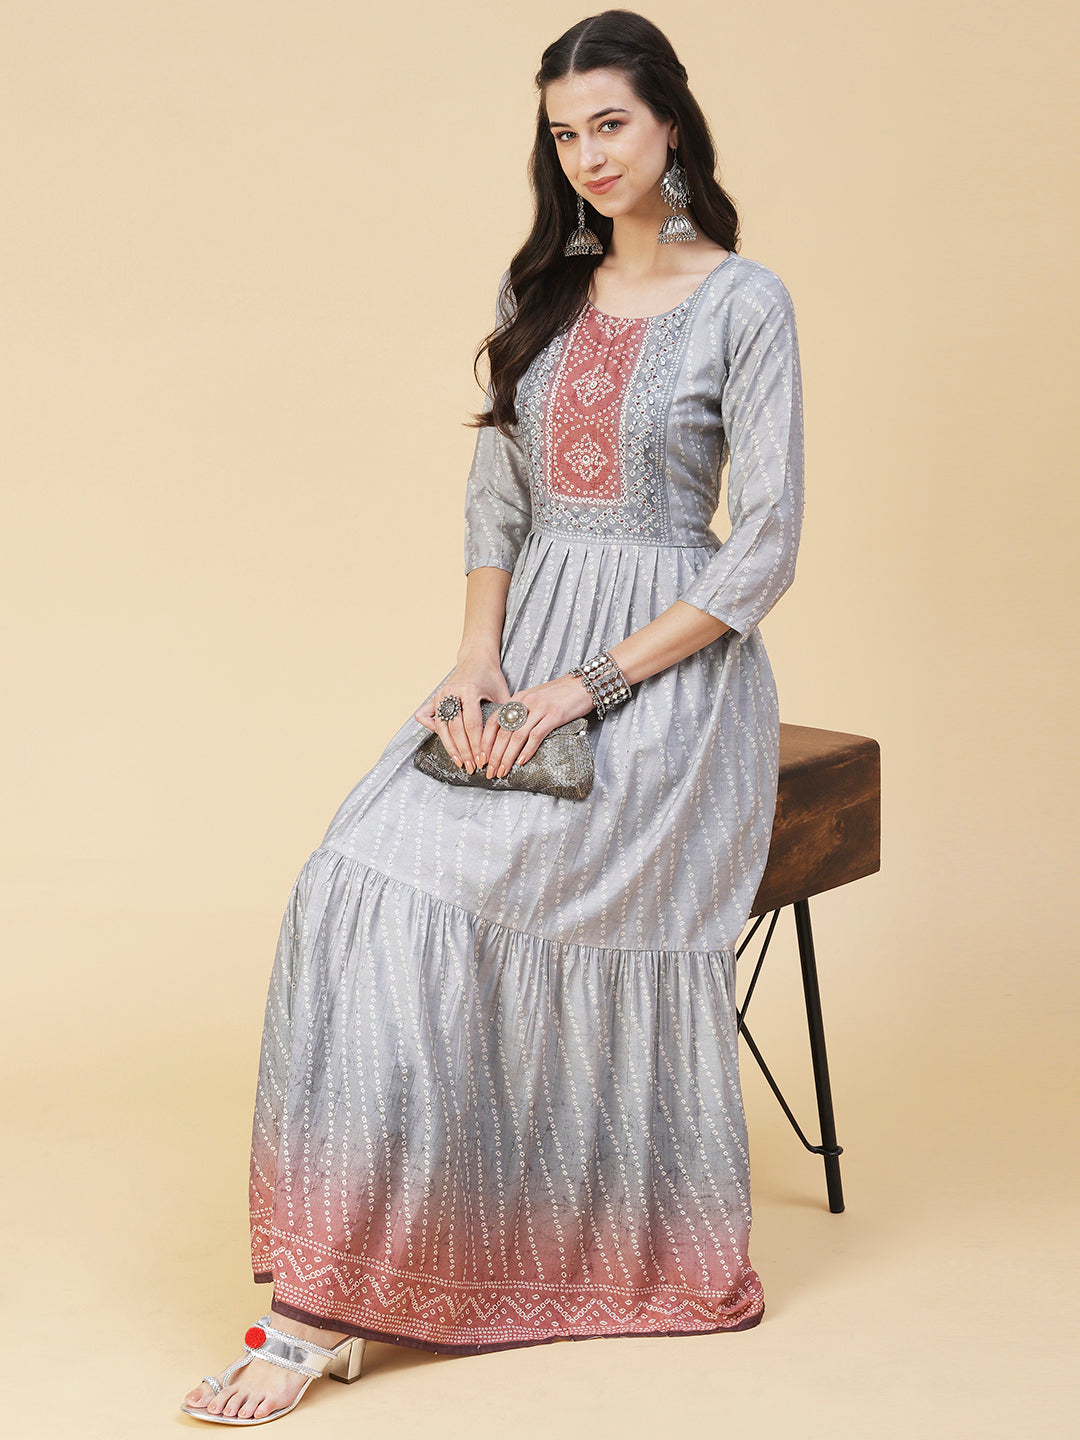 Bandhani Printed & Hand Embroidered Fit & Flare Maxi Dress - Grey